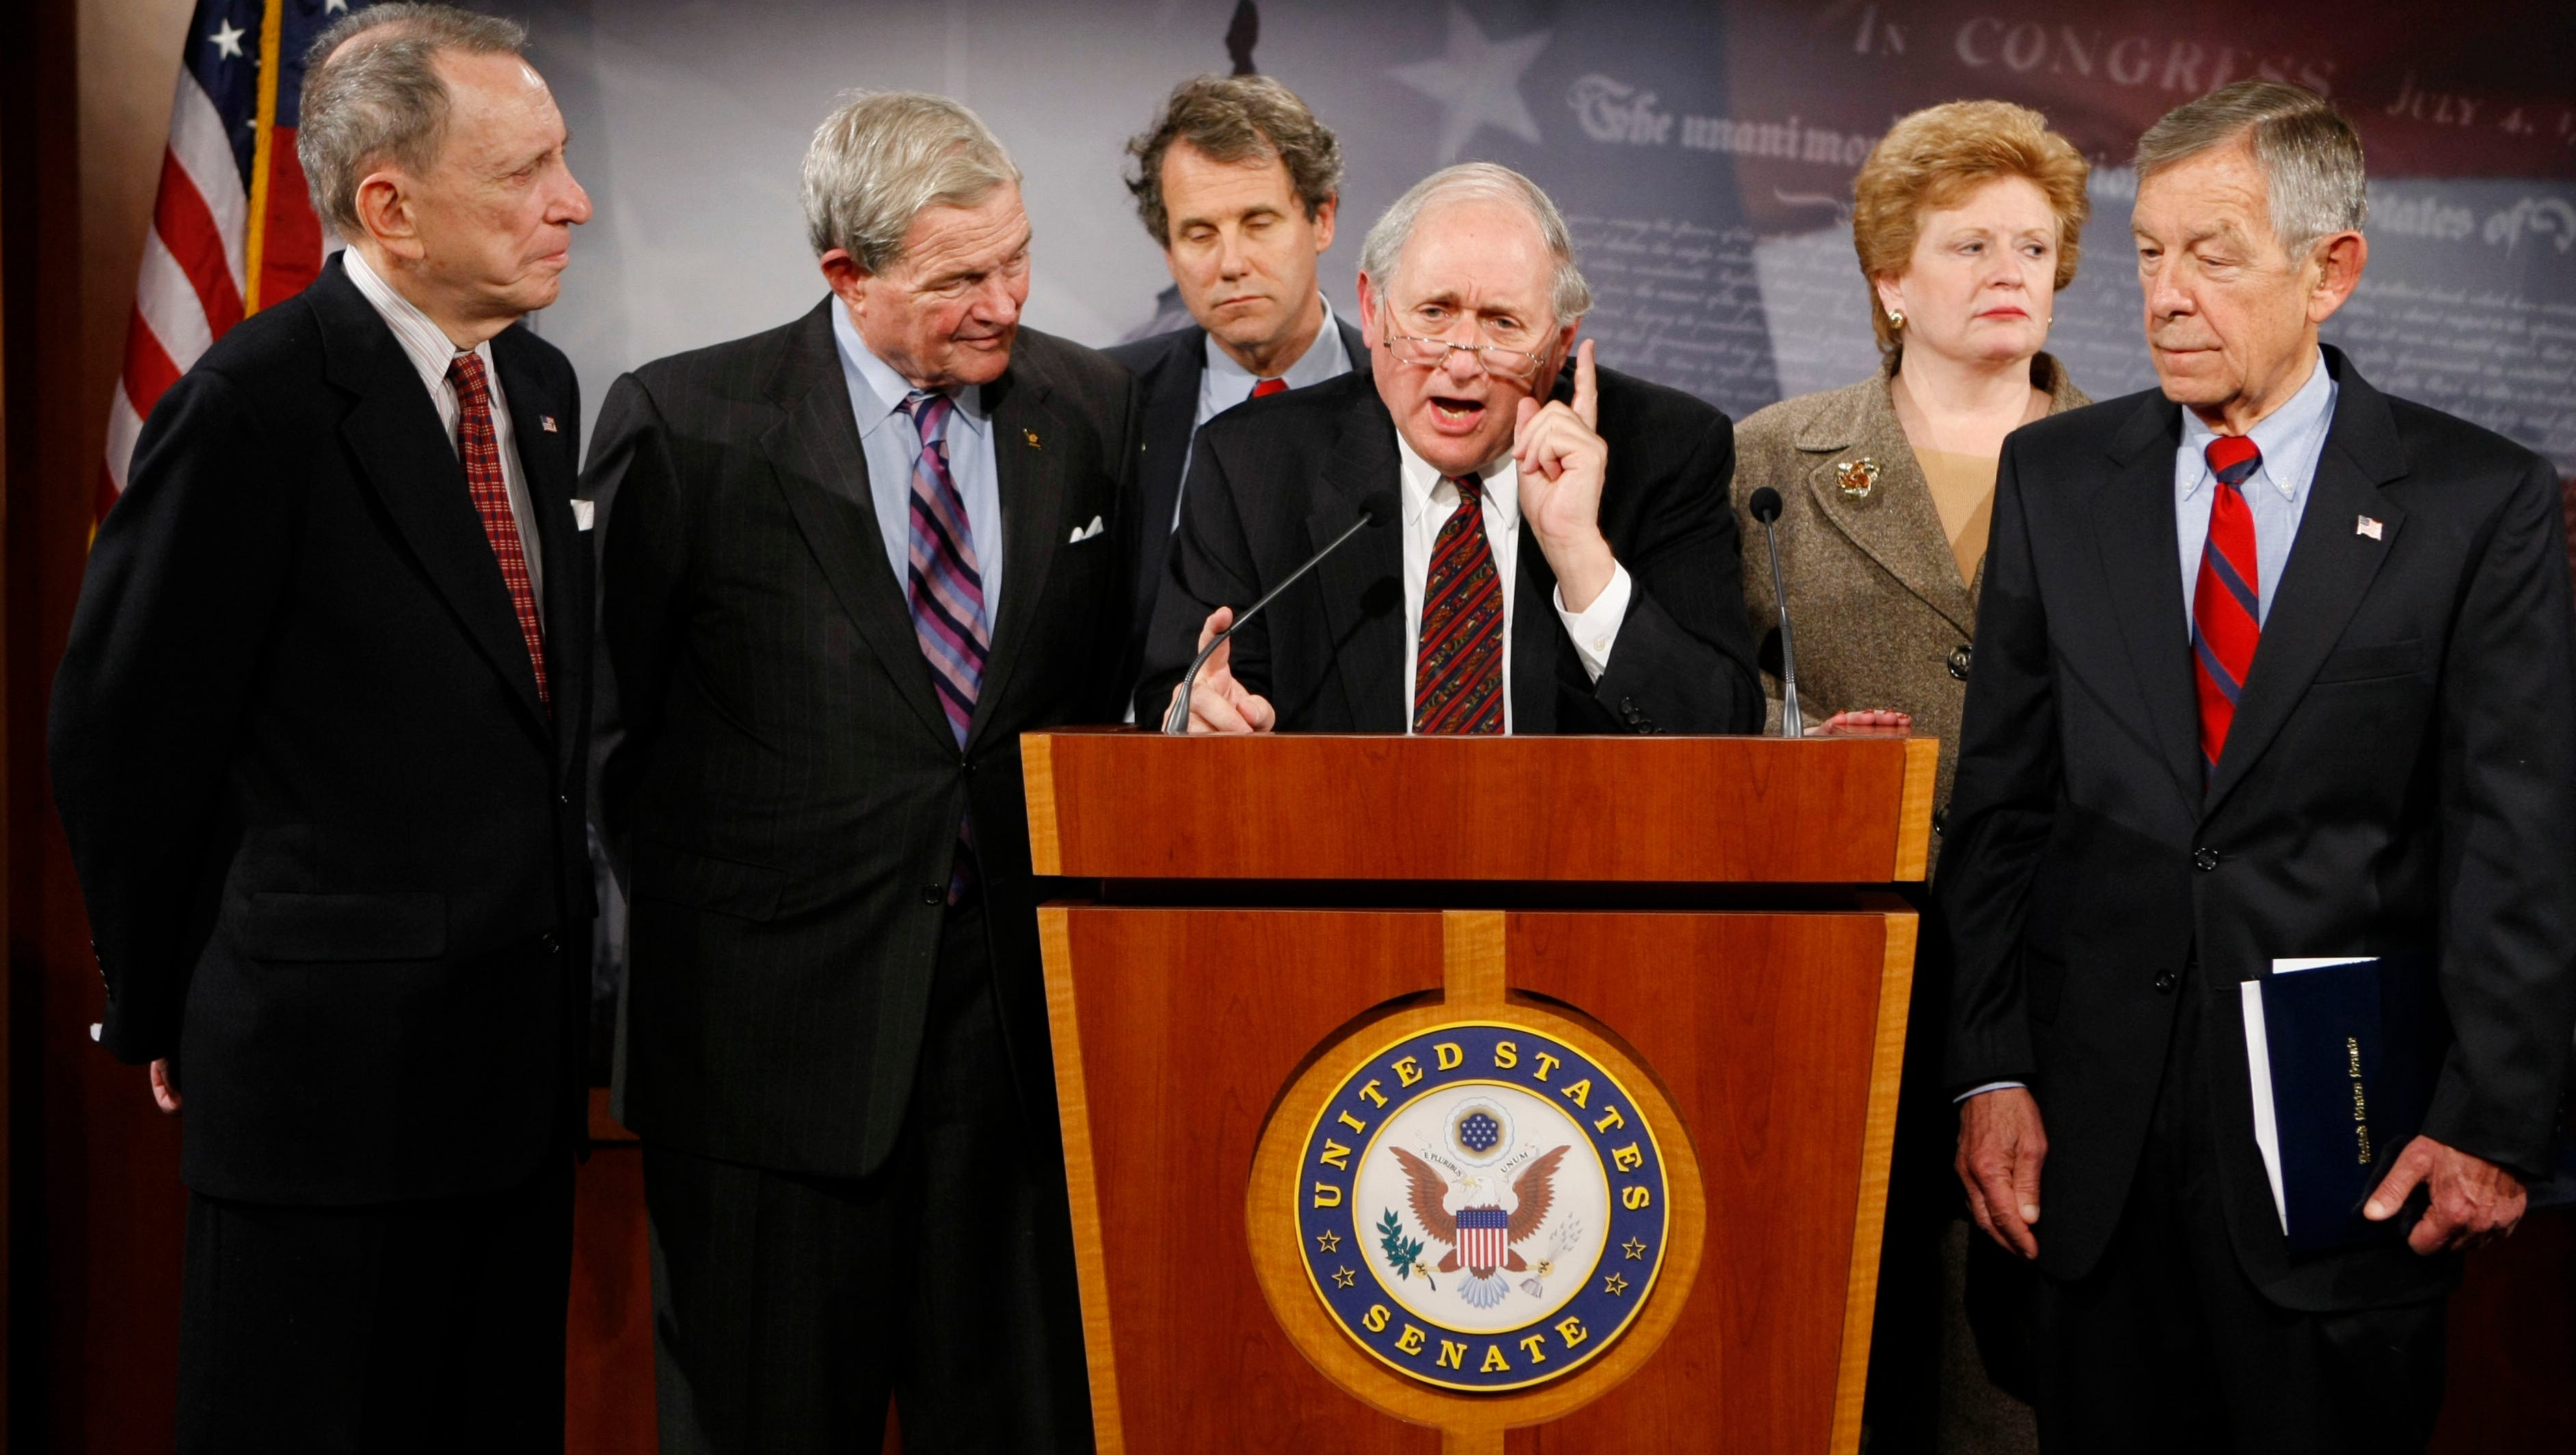 Sen. Carl Levin gestures during a  news conference on Capitol Hill in Washington, Thursday, Nov. 20, 2008, to discuss the auto industry bailout.